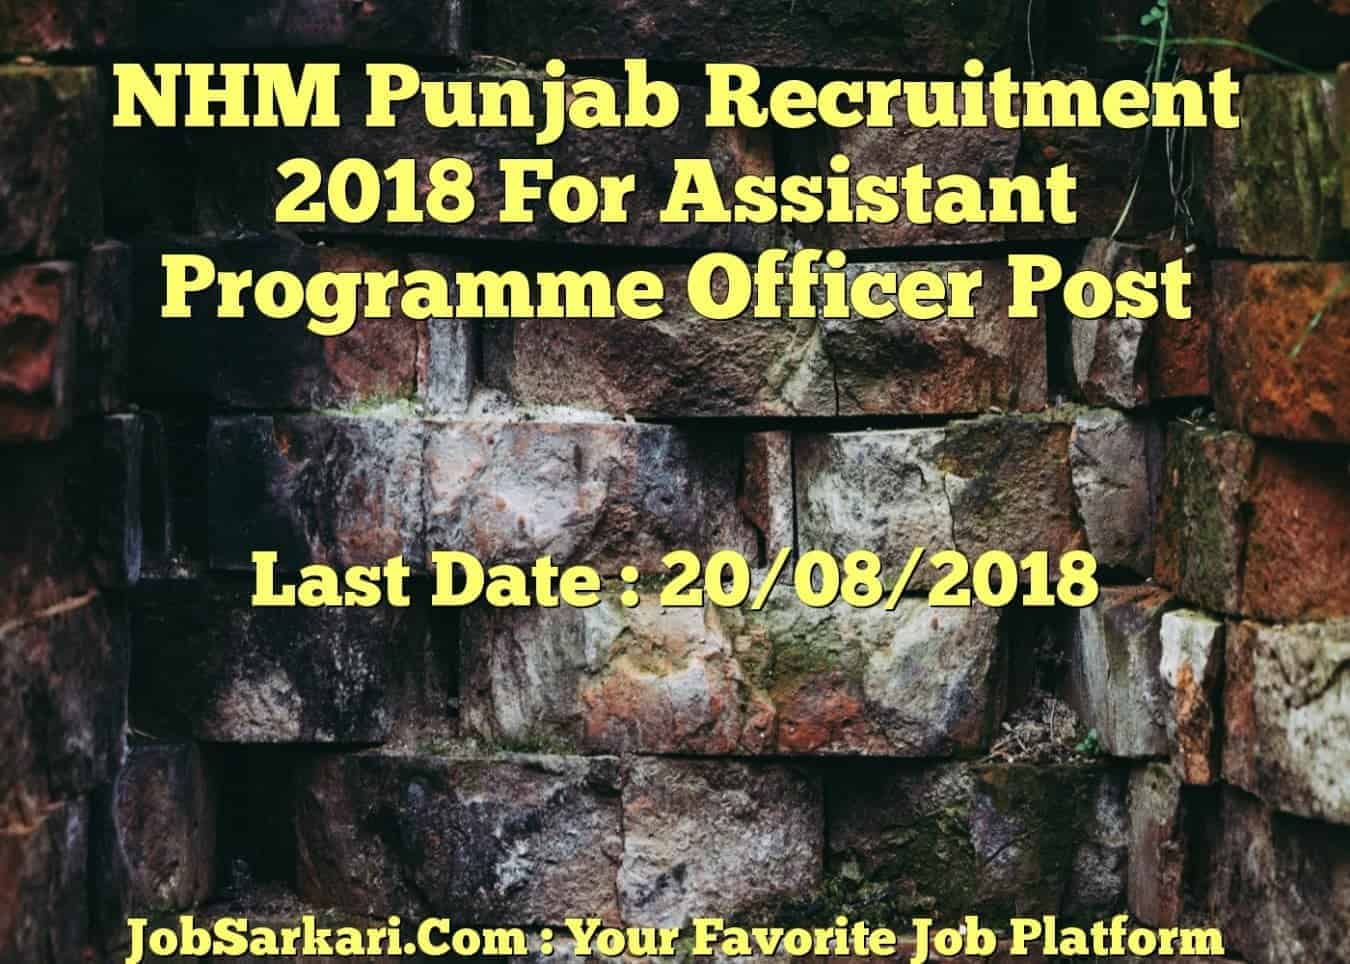 NHM Punjab Recruitment 2018 For Assistant Programme Officer Post